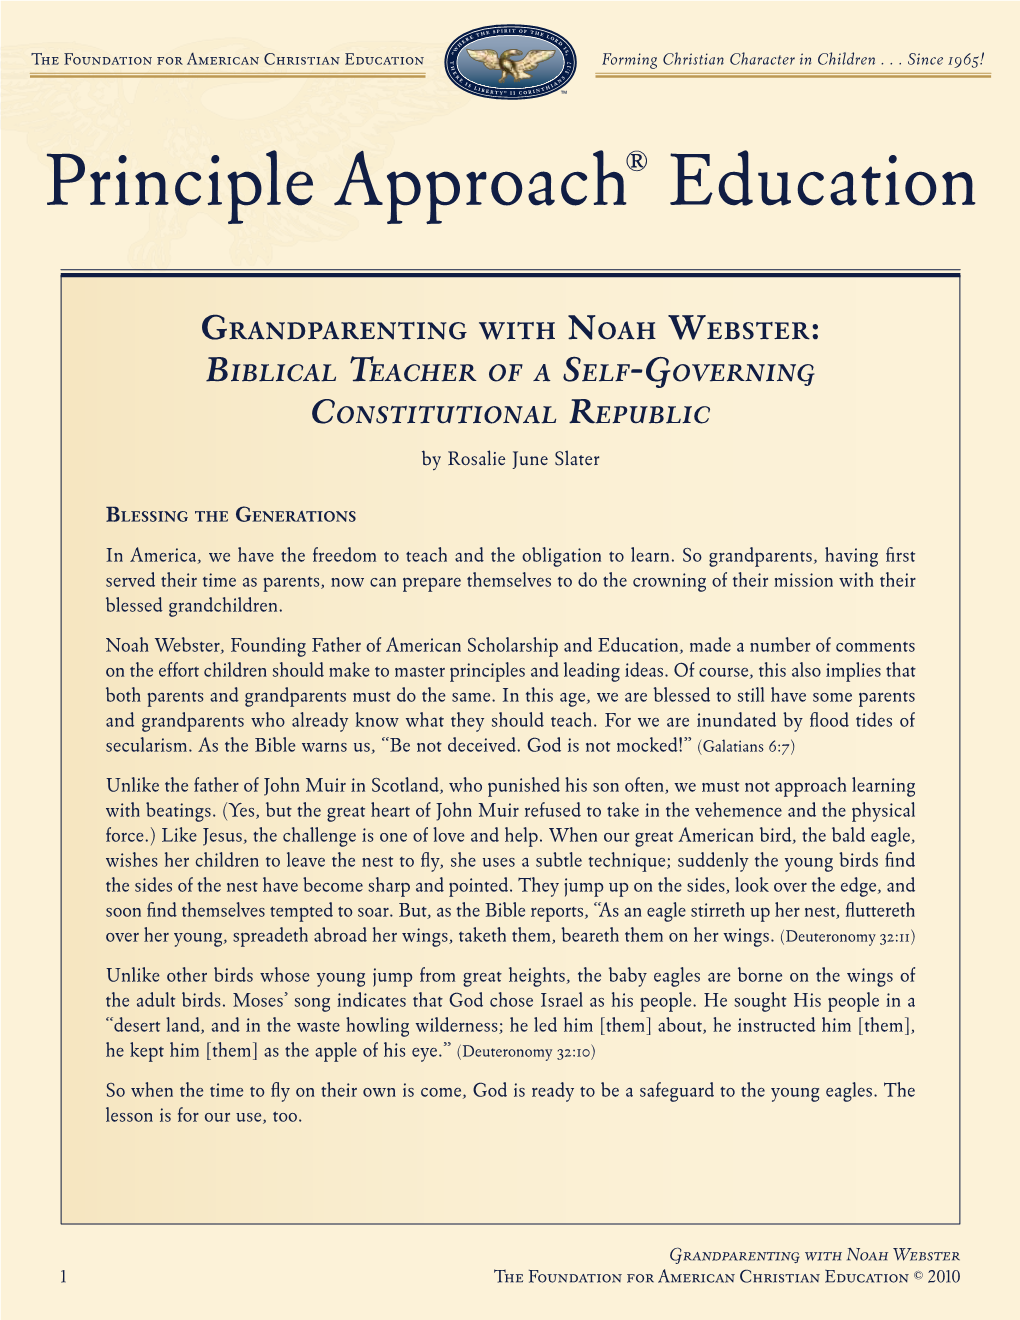 Grandparenting with Noah Webster: Biblical Teacher of a Self-Governing Constitutional Republic by Rosalie June Slater